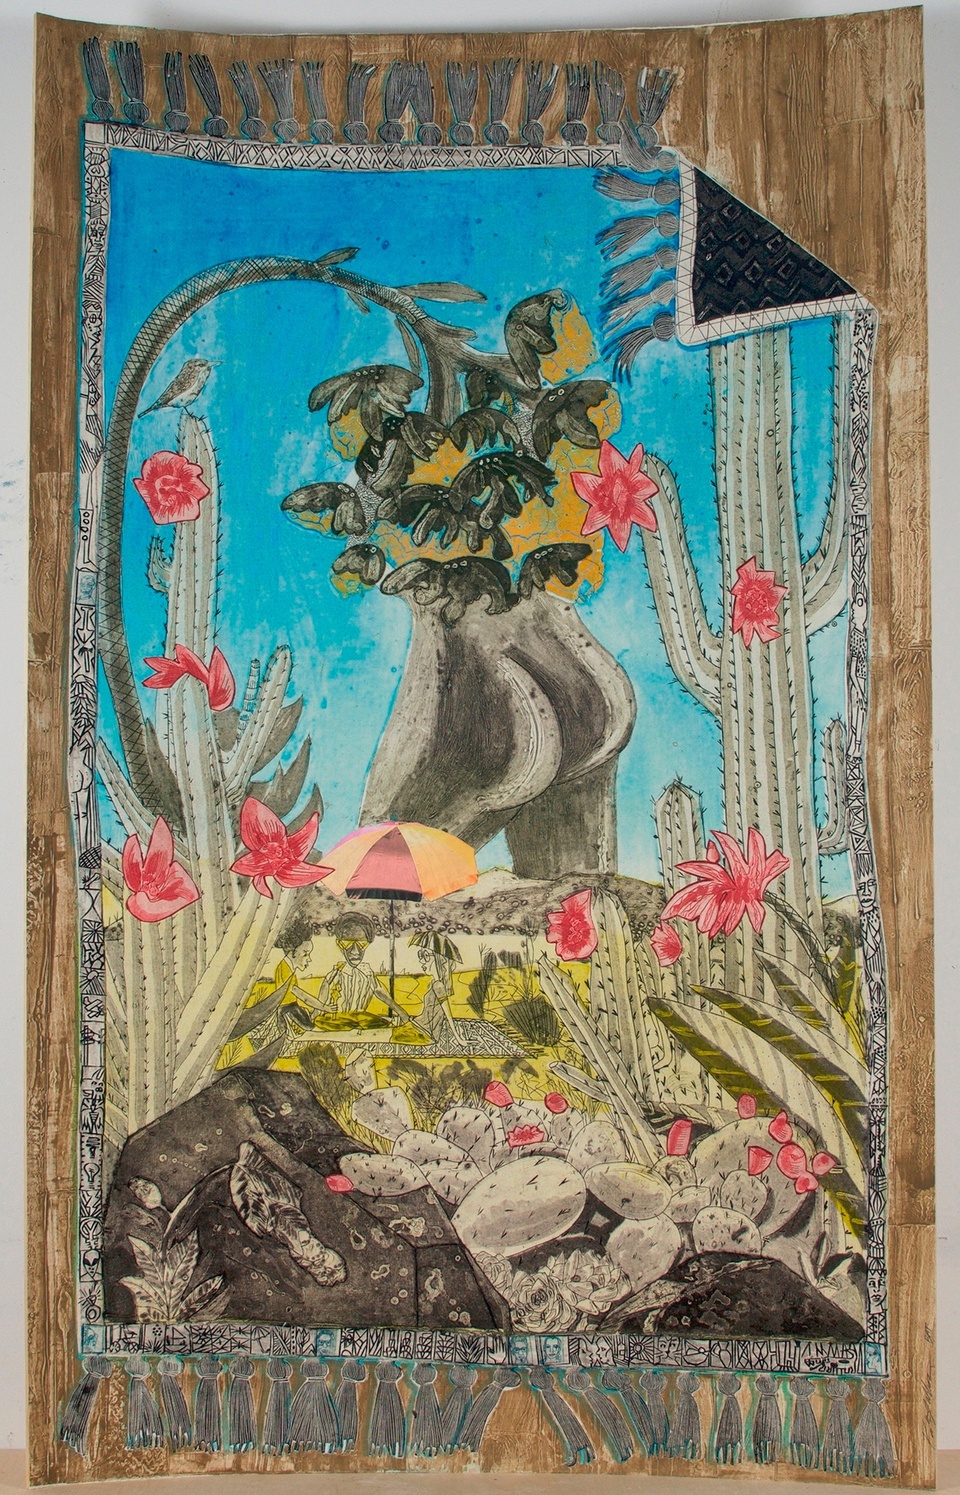 Multi-color print of the lower half of a human figure surrounded by pink flowers, green plants, and blue sky